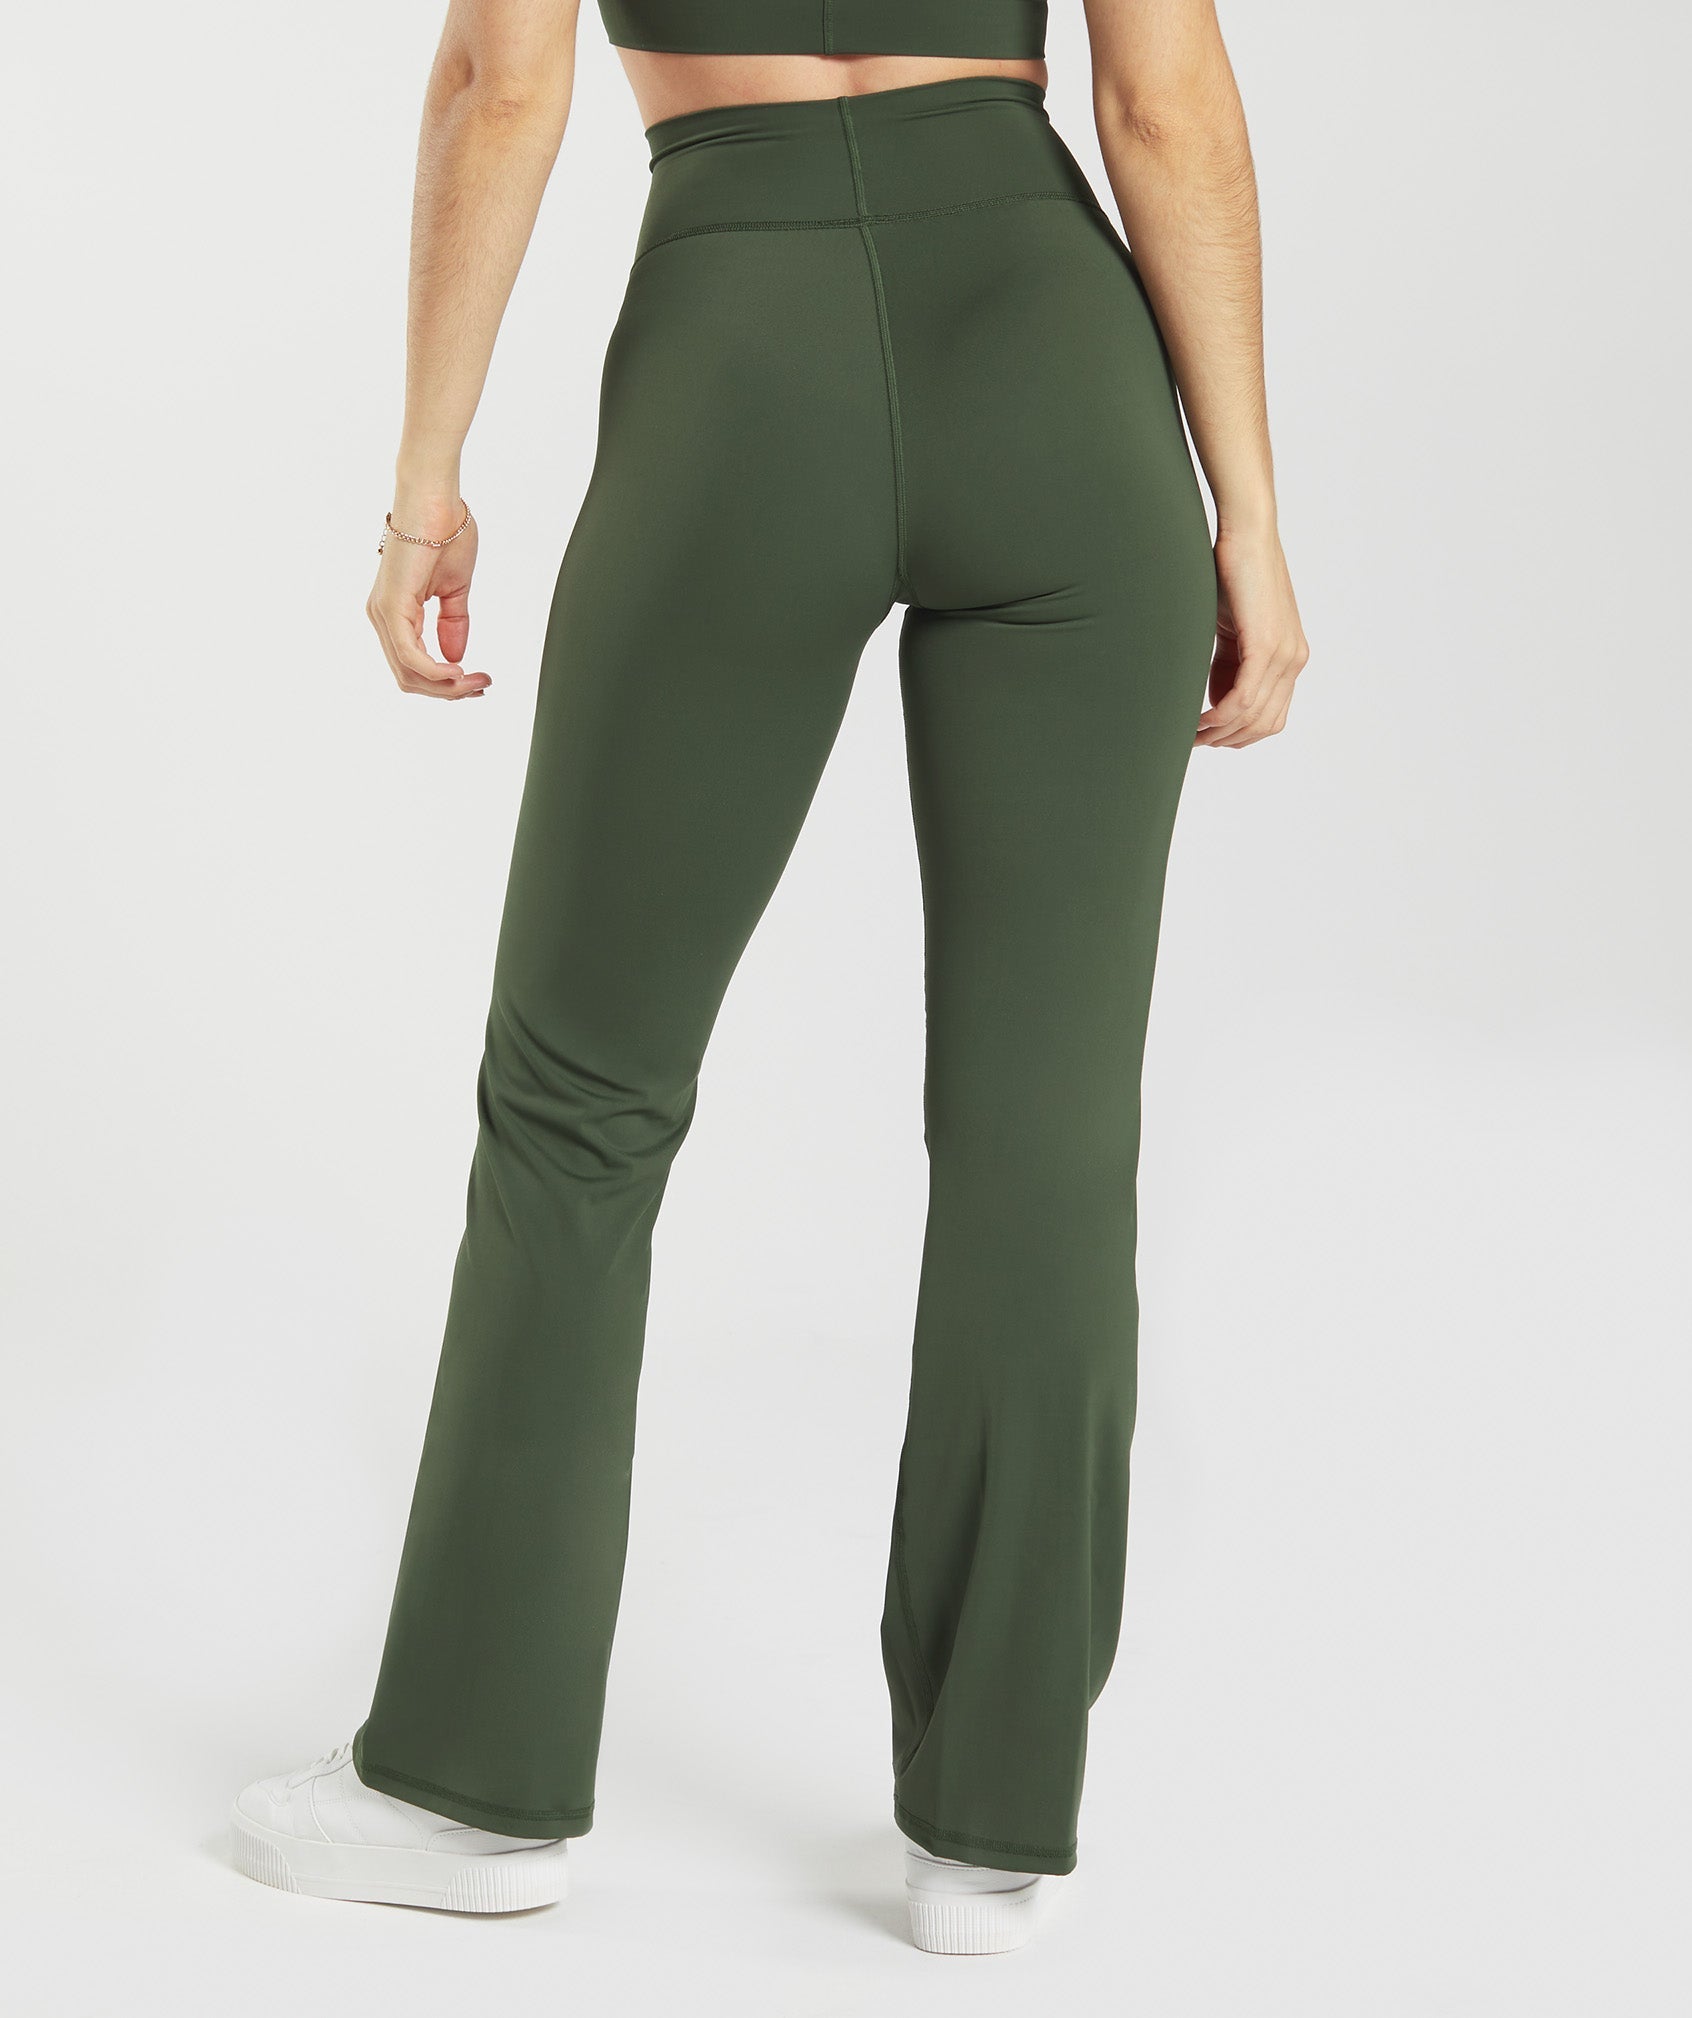 Super Stretchy High Waisted Flare Pants For Women LU Capri Yoga Workout  High Waisted Flare Leggings For Gym, Running, And Sports Breathable Design  93ess From Clothesyes, $25.38